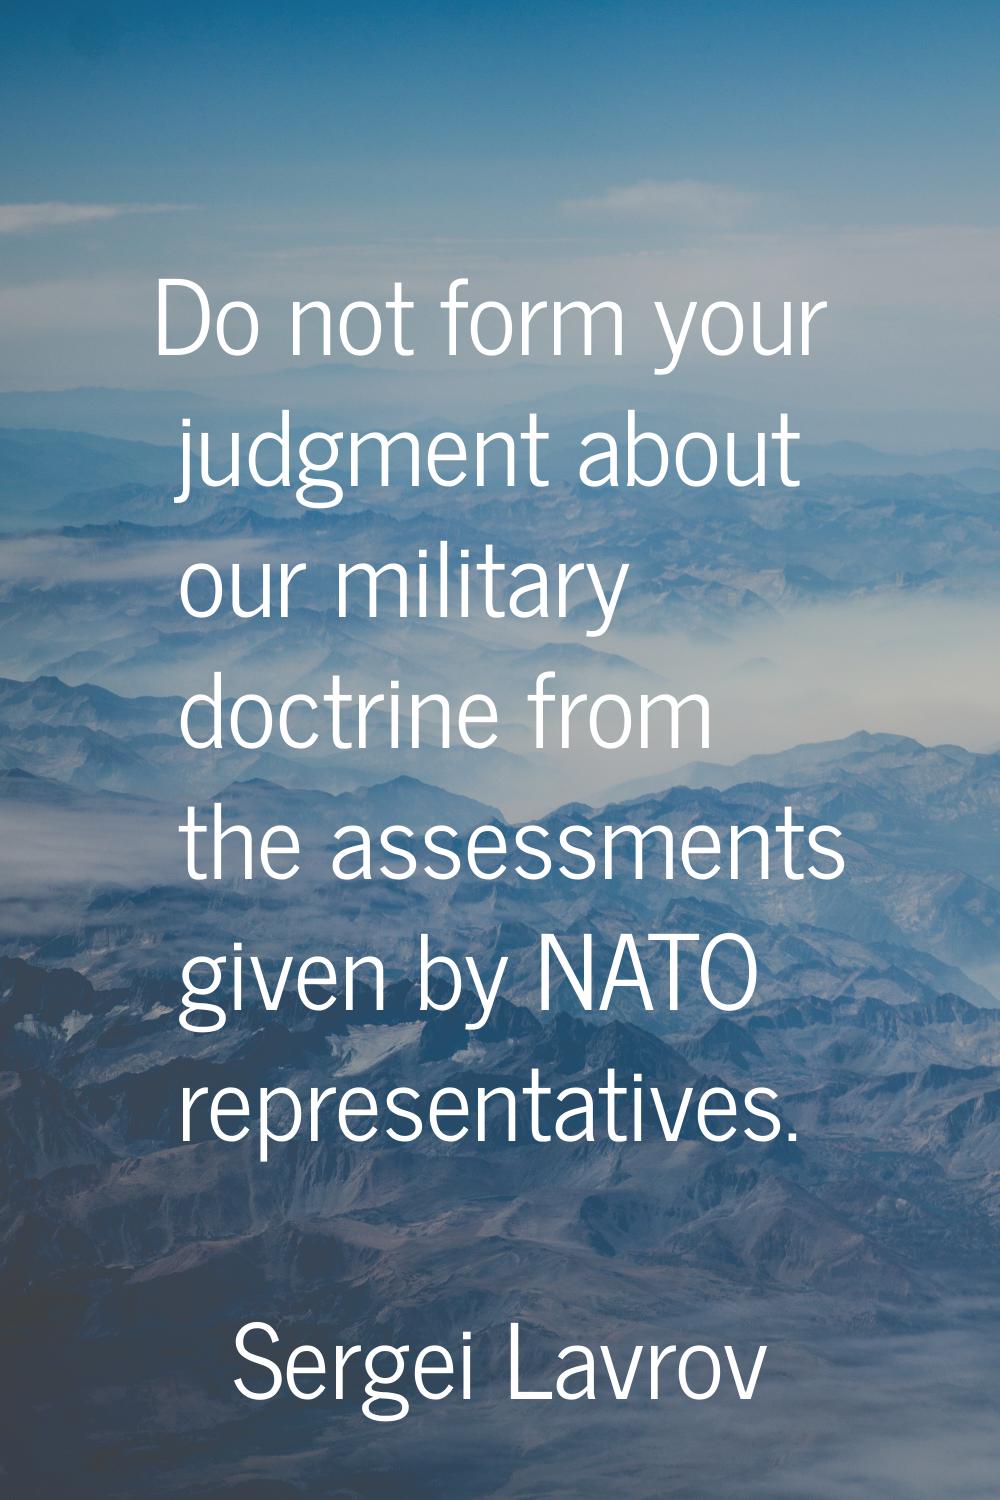 Do not form your judgment about our military doctrine from the assessments given by NATO representa